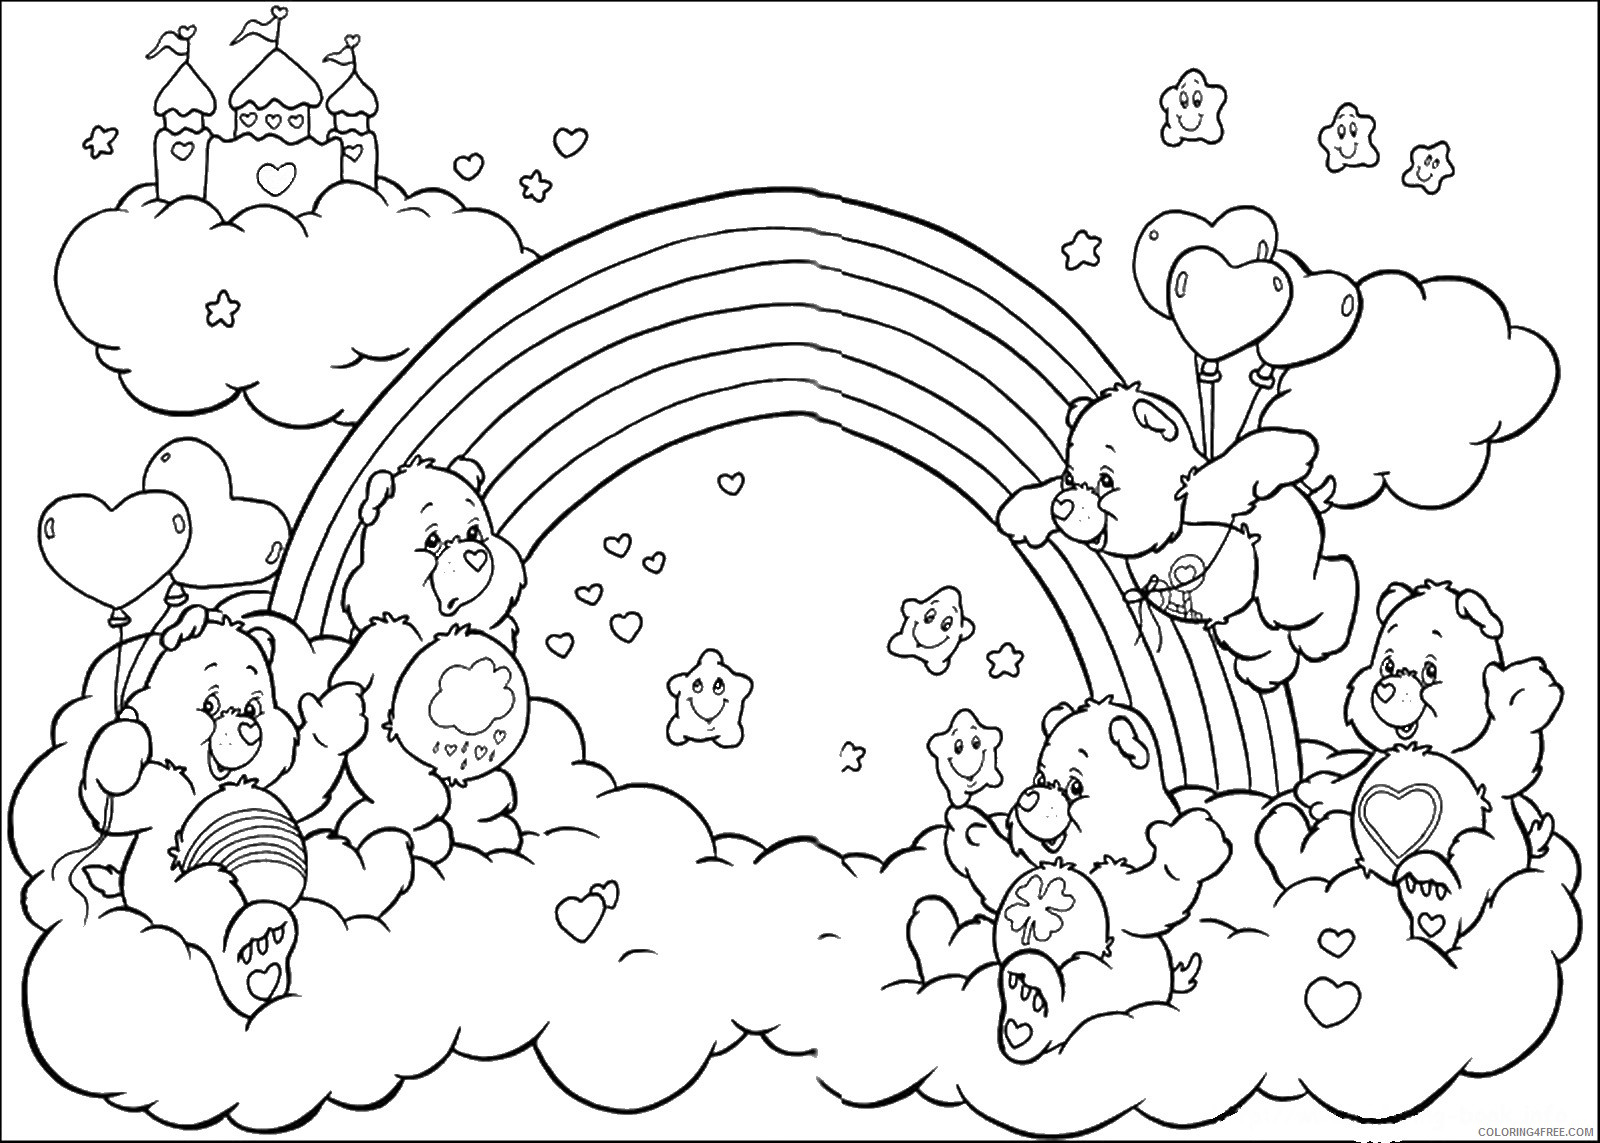 Care Bears Coloring Pages Cartoons care_bears_cl_26 Printable 2020 1562 Coloring4free